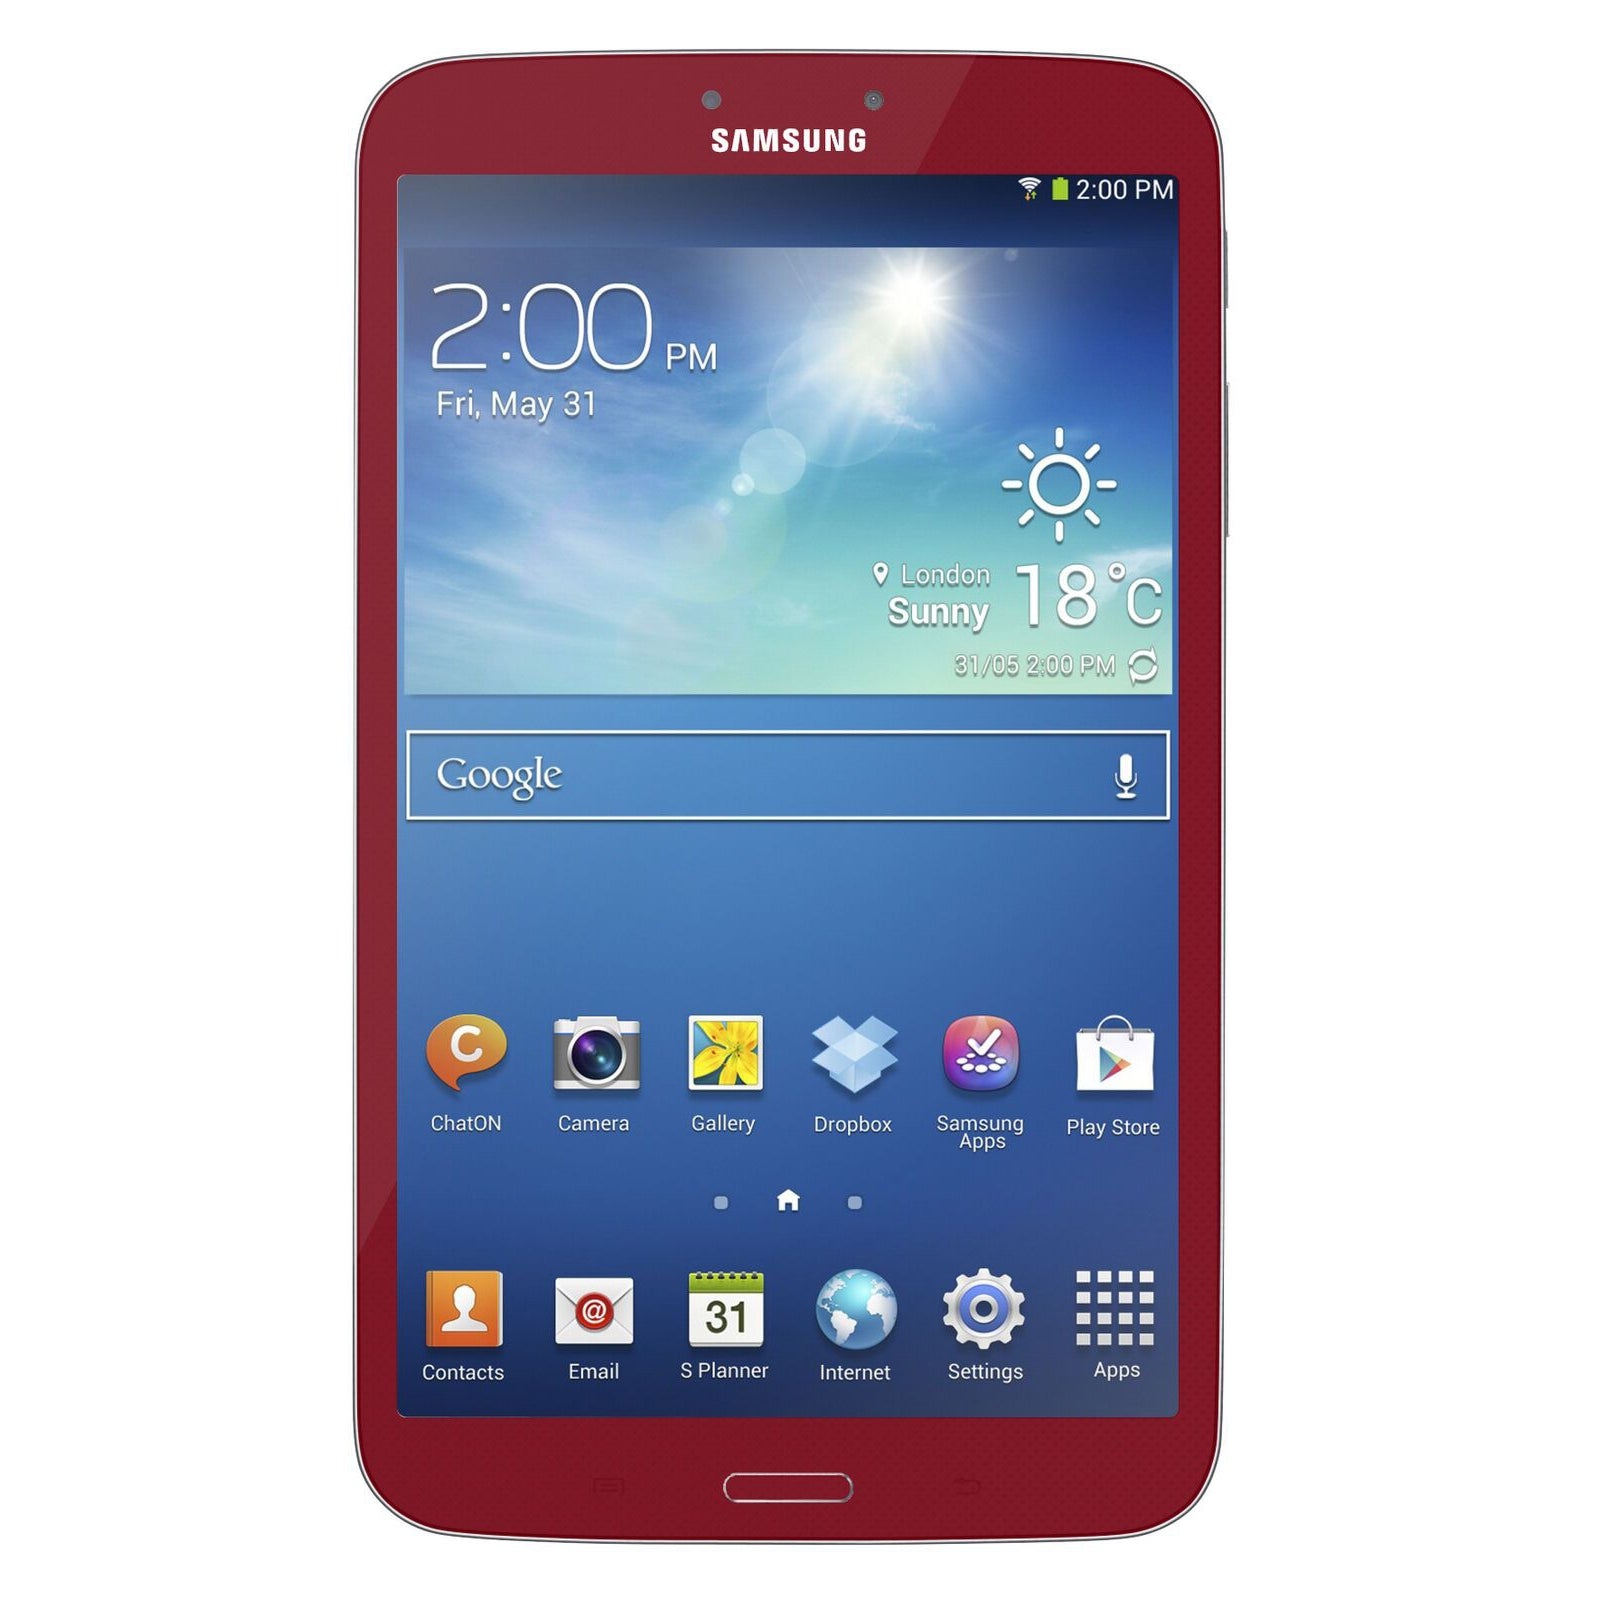 Samsung Galaxy Tab 3 16GB 8inch Android Tablet SM-T210 White/Black/Red UK Seller